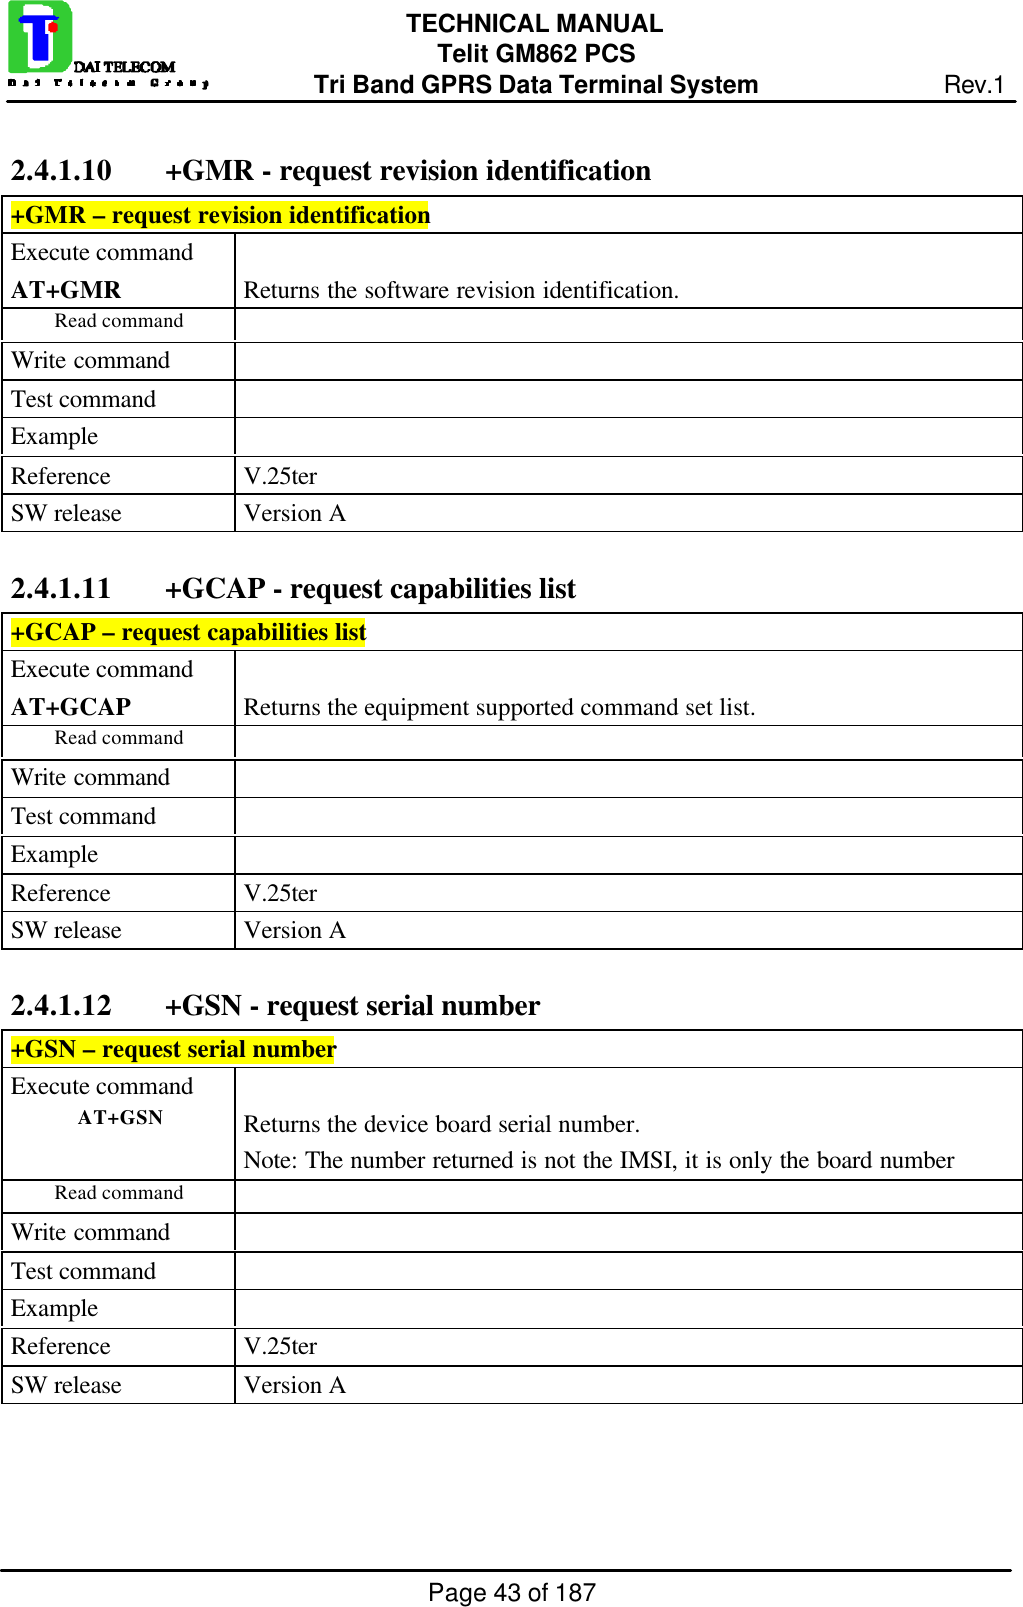 Page 43 of 187TECHNICAL MANUALTelit GM862 PCSTri Band GPRS Data Terminal System Rev.12.4.1.10  +GMR - request revision identification+GMR – request revision identificationExecute commandAT+GMR Returns the software revision identification.Read commandWrite commandTest commandExampleReference V.25terSW release Version A2.4.1.11  +GCAP - request capabilities list+GCAP – request capabilities listExecute commandAT+GCAP Returns the equipment supported command set list.Read commandWrite commandTest commandExampleReference V.25terSW release Version A2.4.1.12  +GSN - request serial number+GSN – request serial numberExecute commandAT+GSN Returns the device board serial number.Note: The number returned is not the IMSI, it is only the board numberRead commandWrite commandTest commandExampleReference V.25terSW release Version A